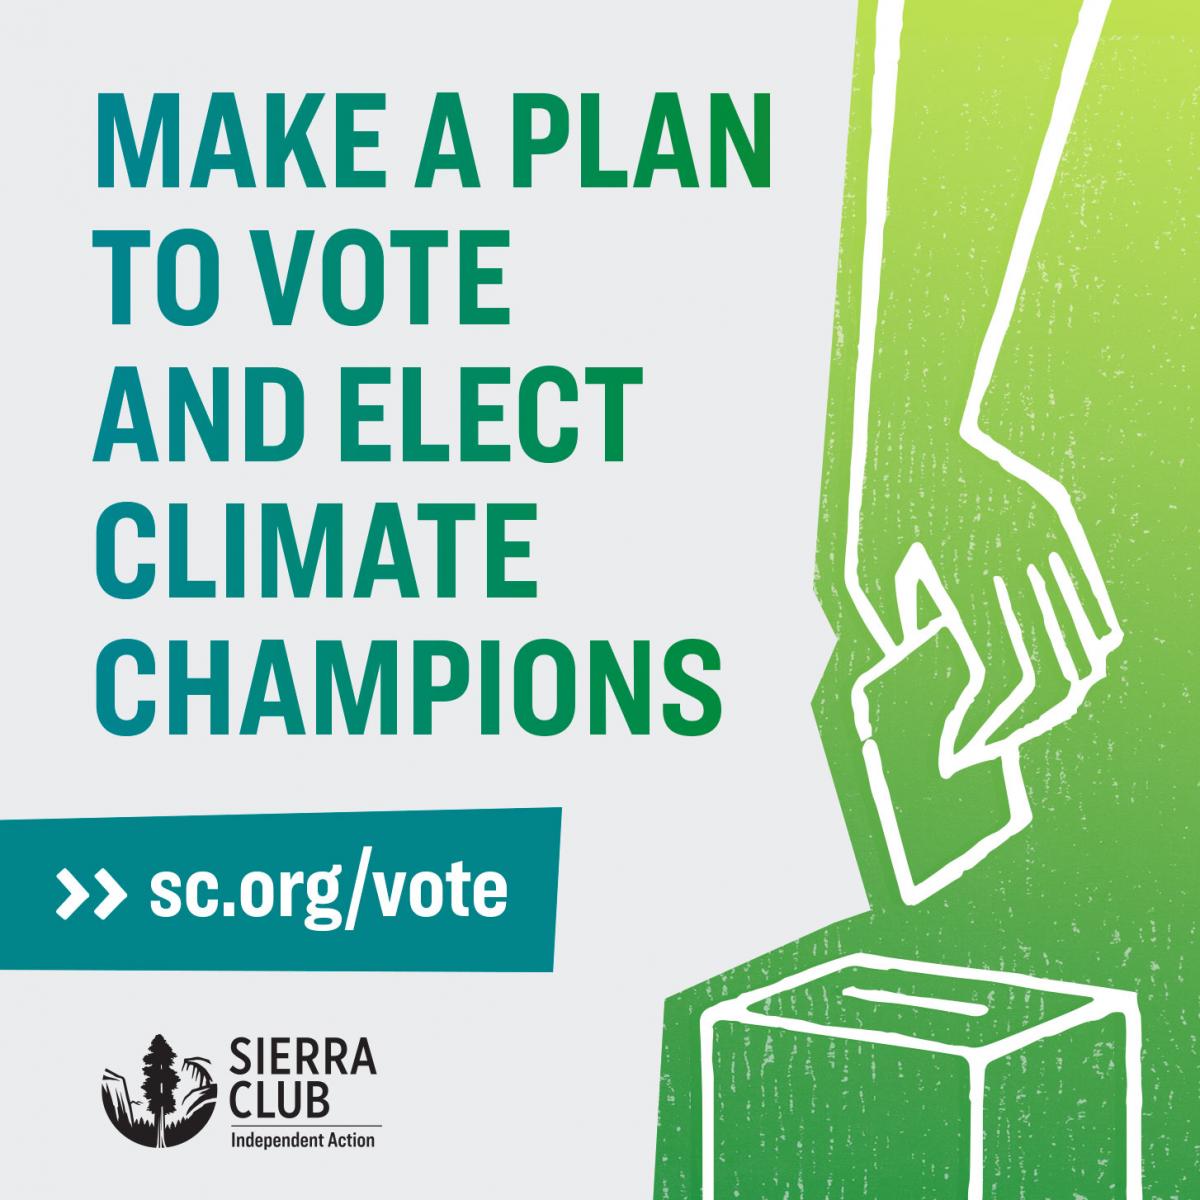 Make a plan to vote and elect climate champions.